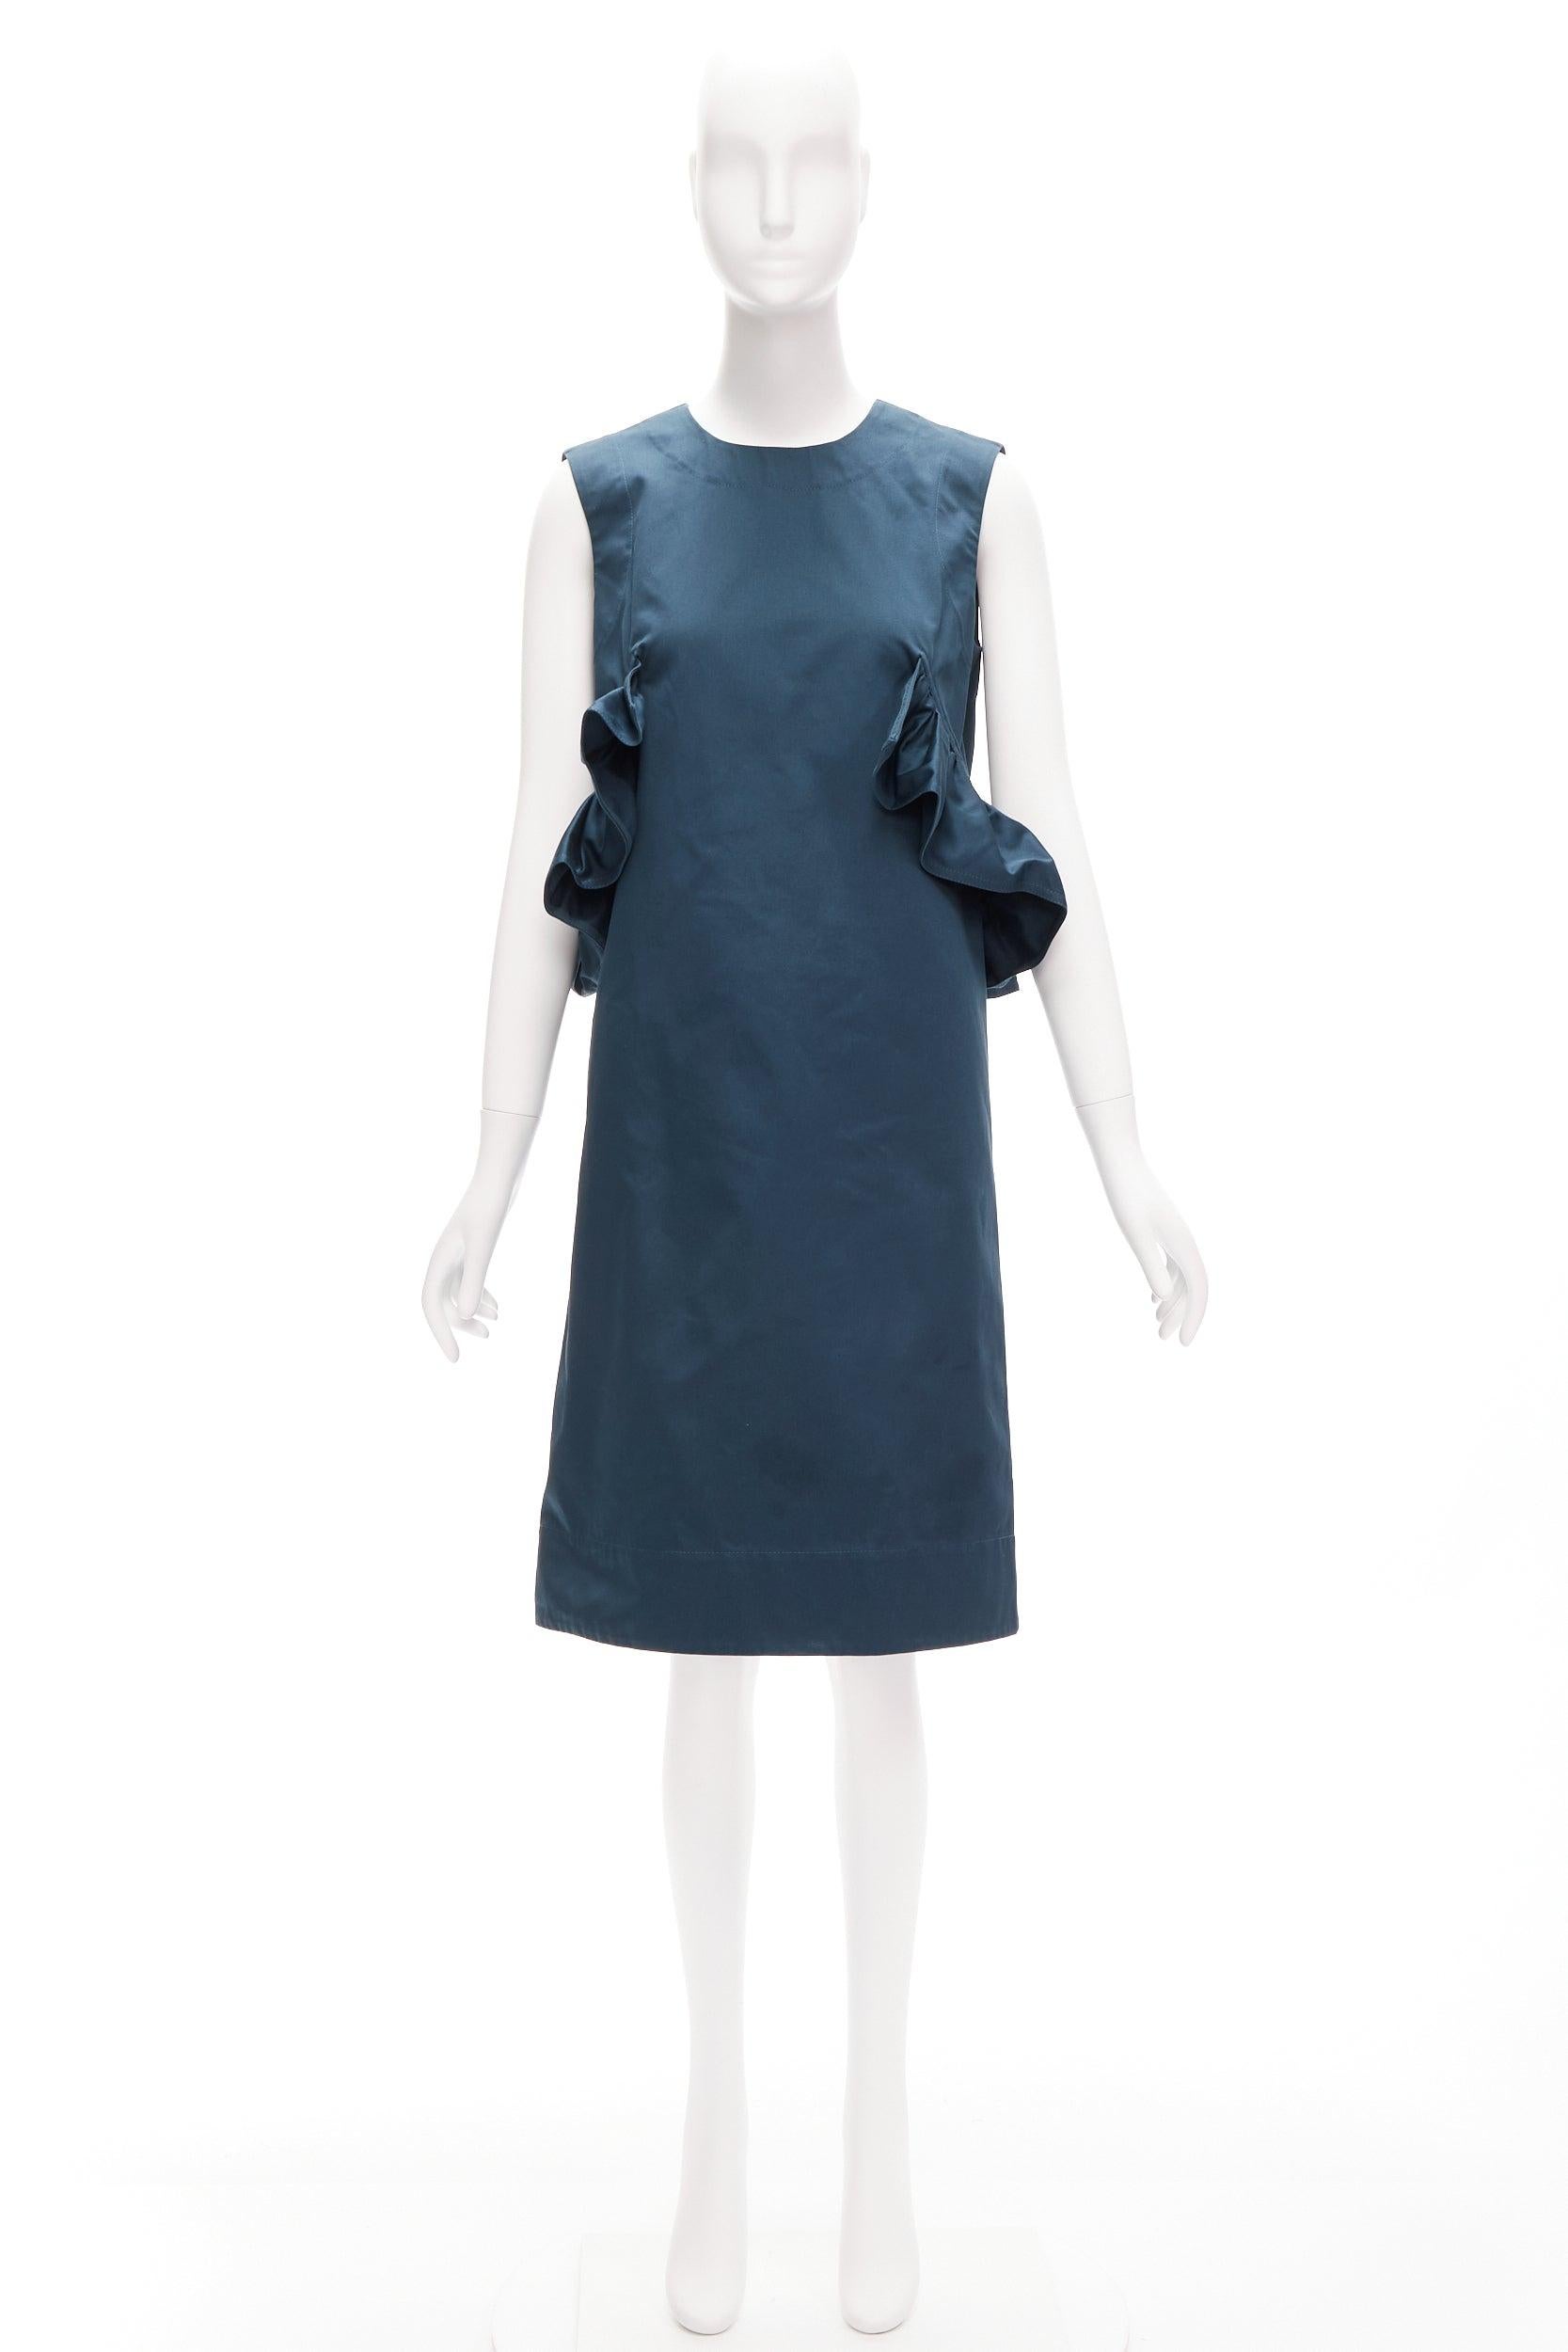 MARNI teal blue ruffle waist round neck cocktail dress IT38 XS For Sale 3